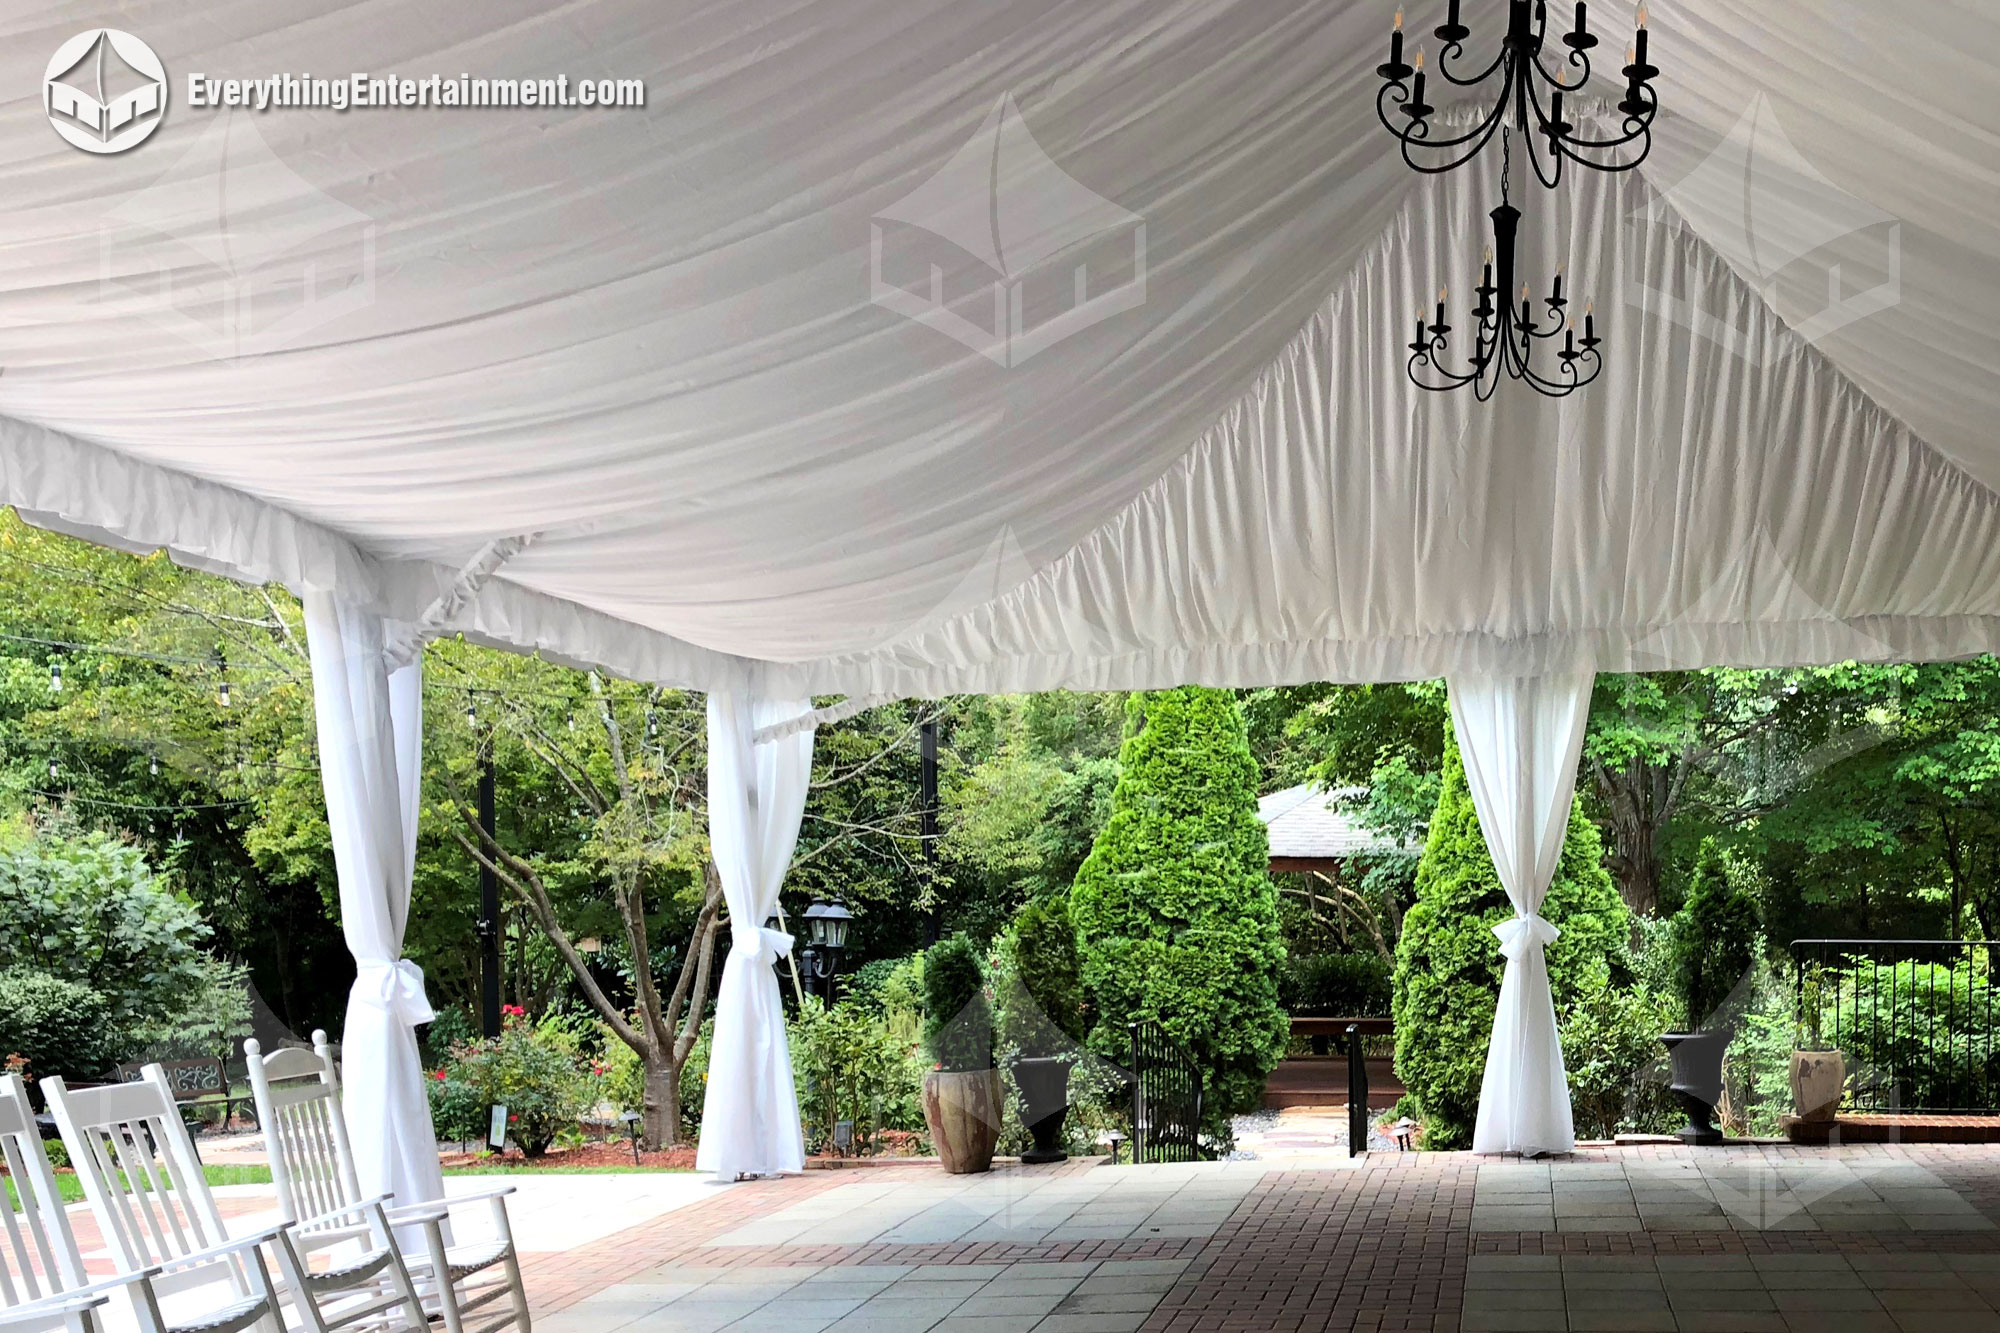  Tent Leg and Ceiling Drapes